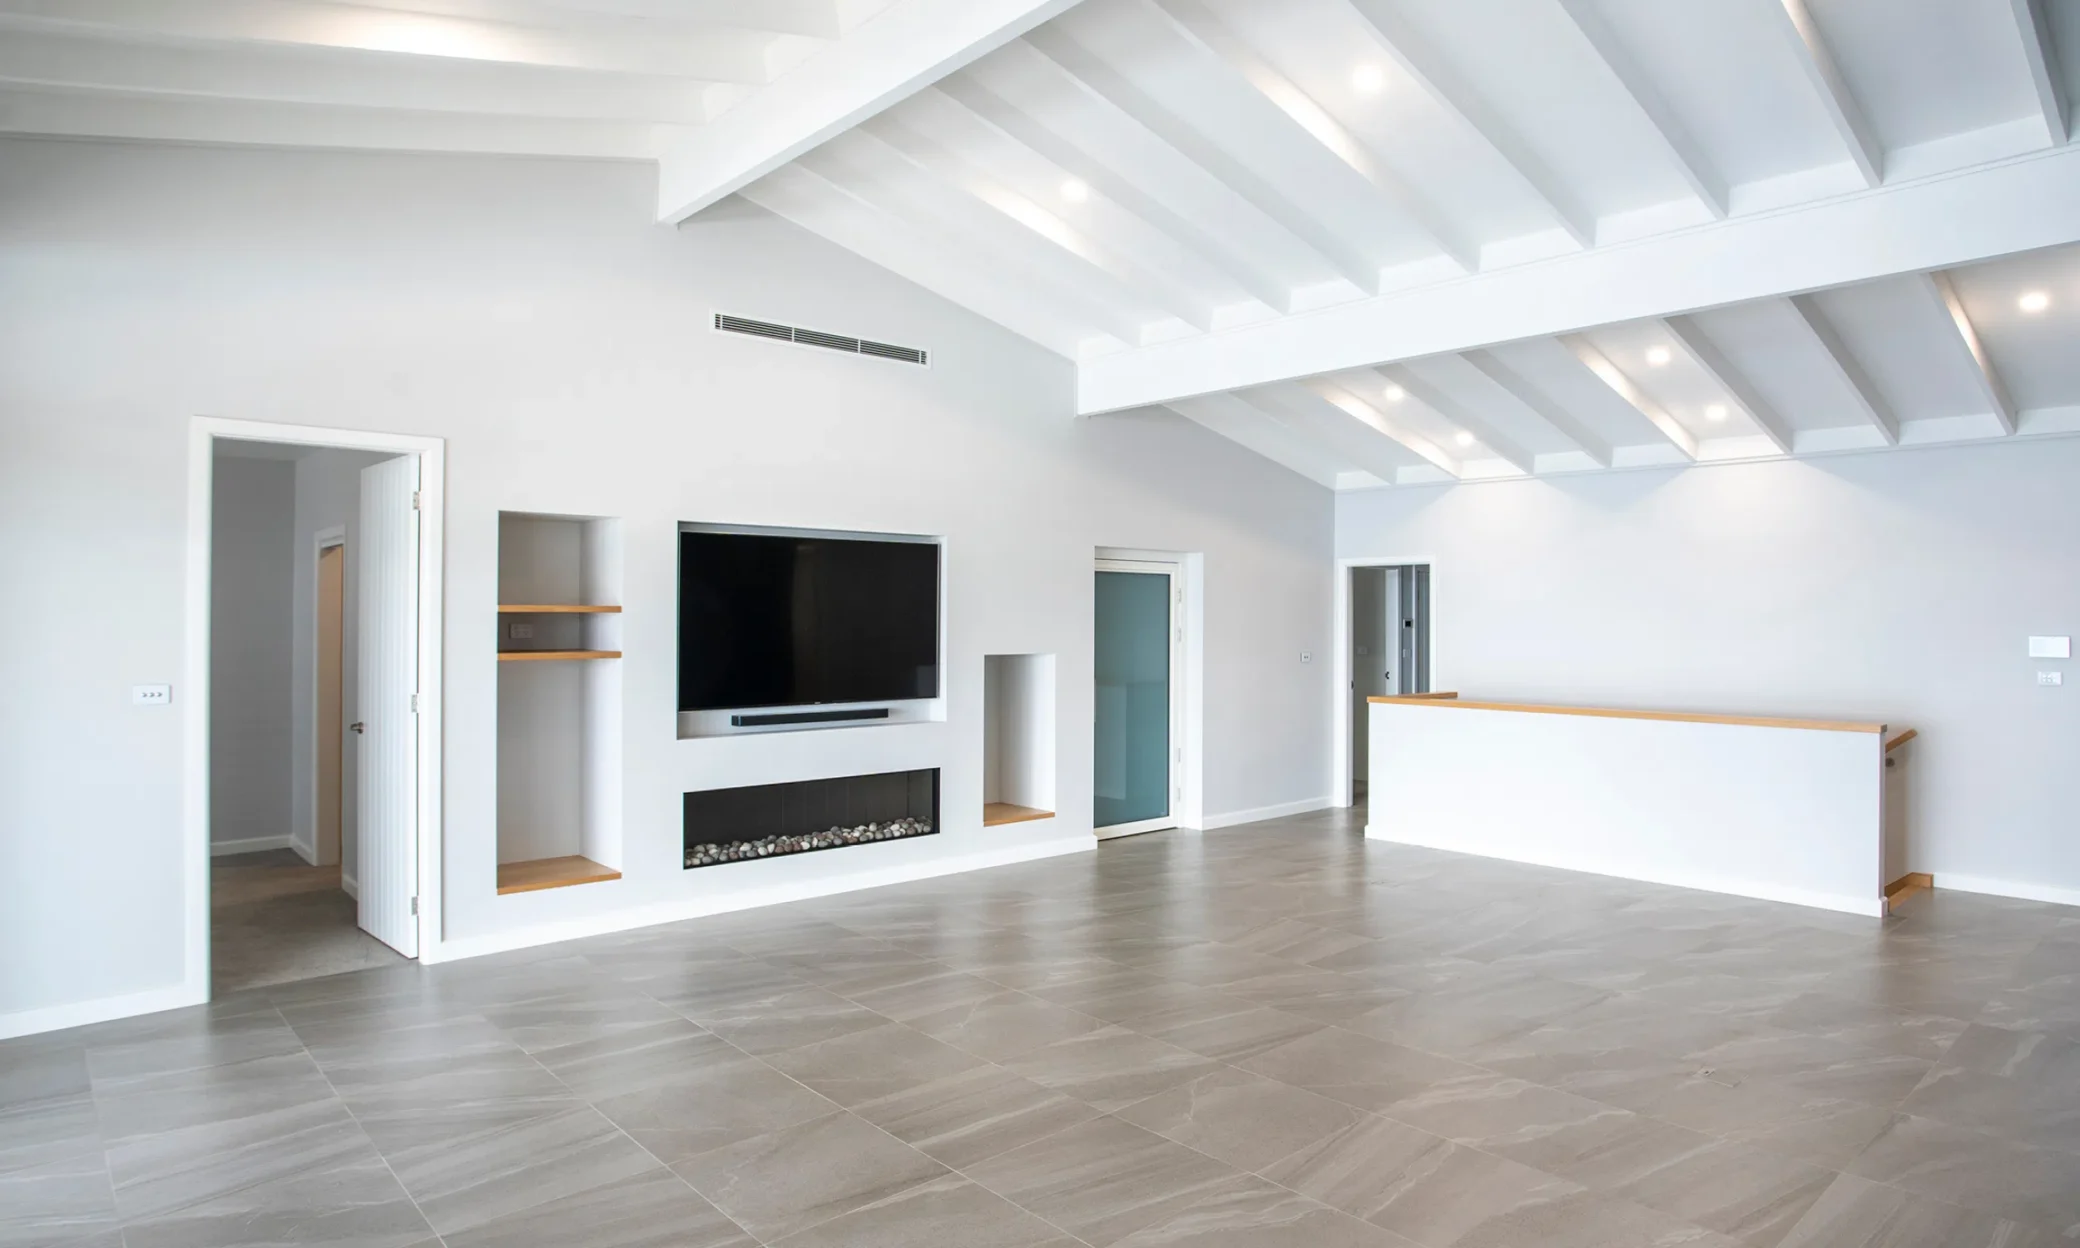 A modern, spacious living room with gray tiled flooring, white walls, and a high ceiling with exposed white beams. There is a built-in fireplace under a wall-mounted TV, and to the right,